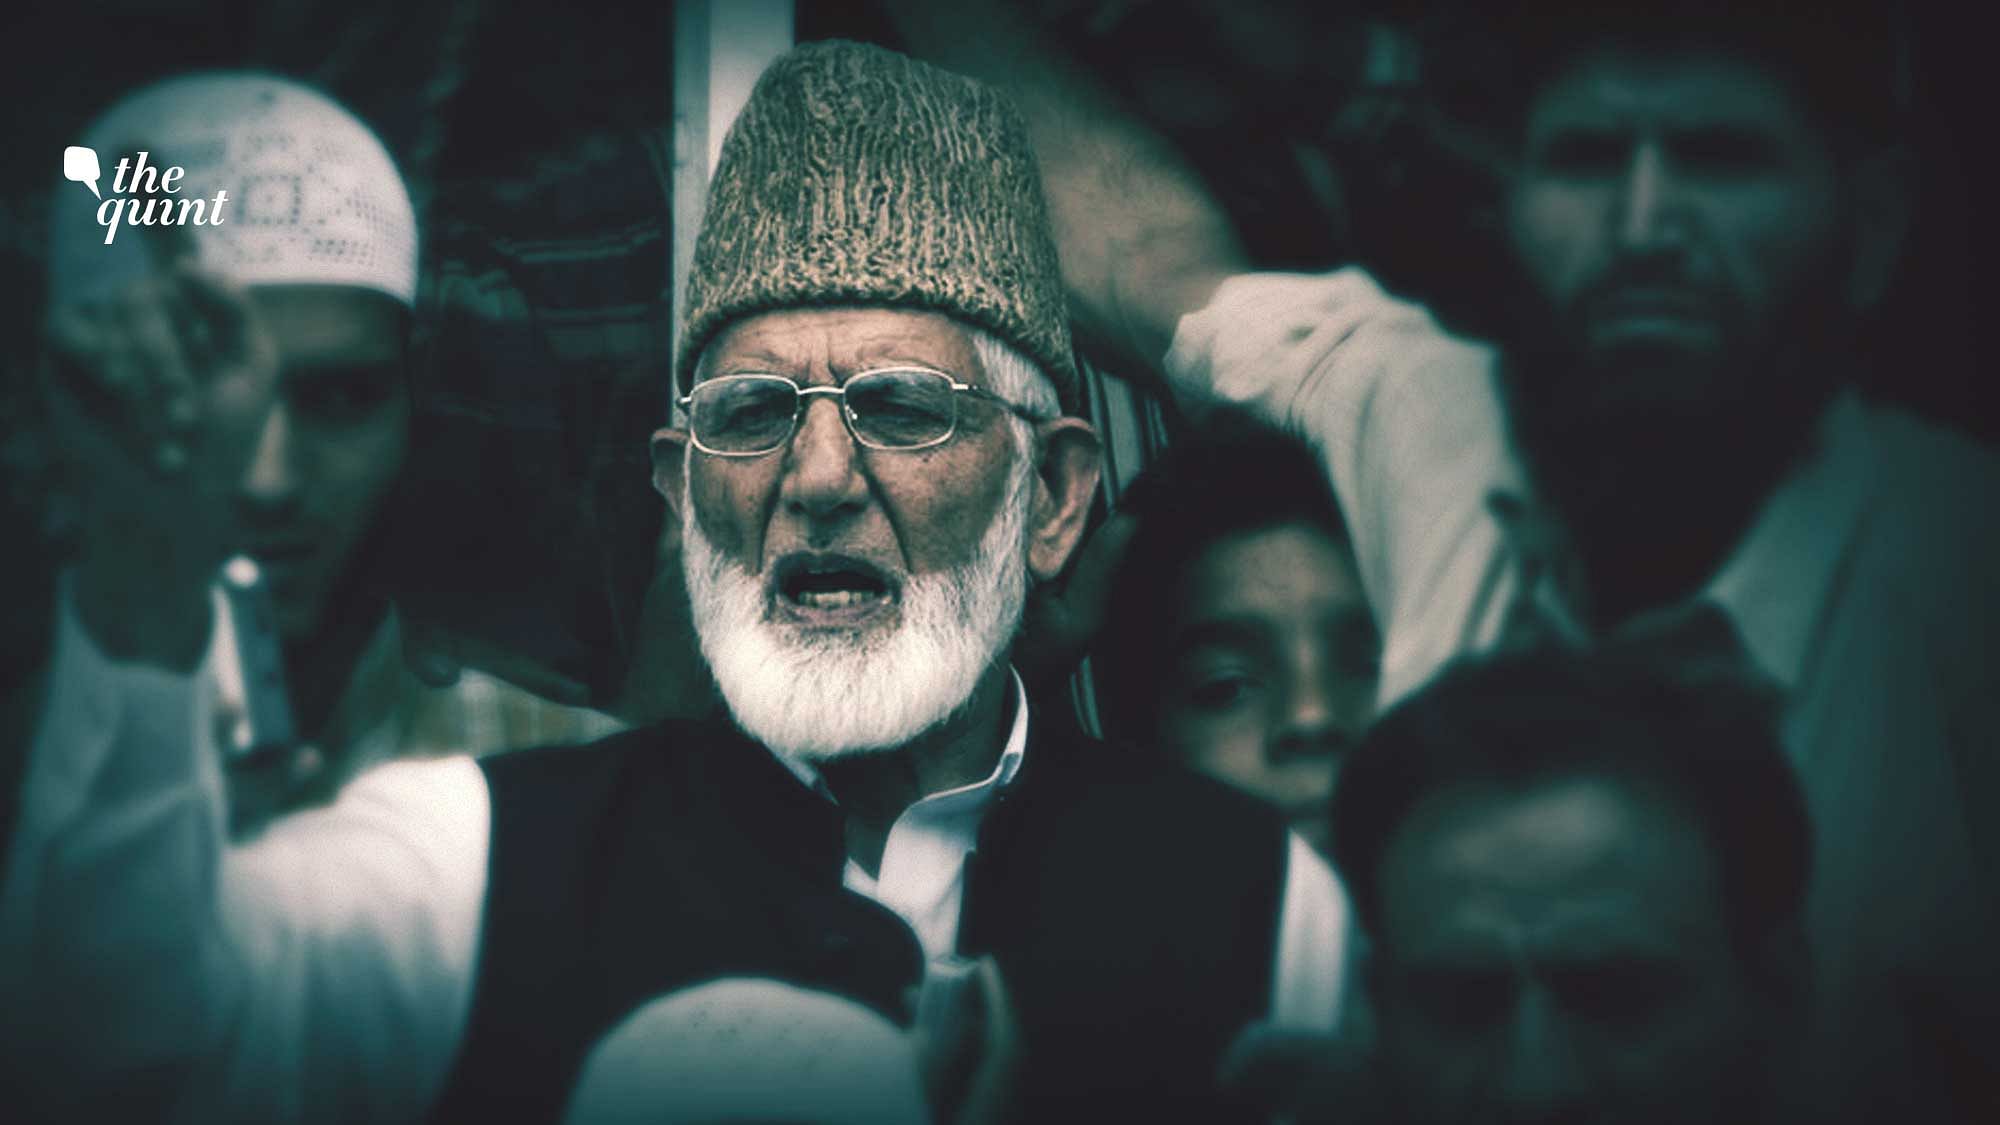 <div class="paragraphs"><p>The Jammu and Kashmir Police registered a First Information Report (FIR) invoking the Unlawful Activities Prevention Act (UAPA) after visuals of separatist leader Syed Ali Shah Geelani’s body being purportedly wrapped in Pakistani flag surfaced on Saturday.</p><p><br></p></div>